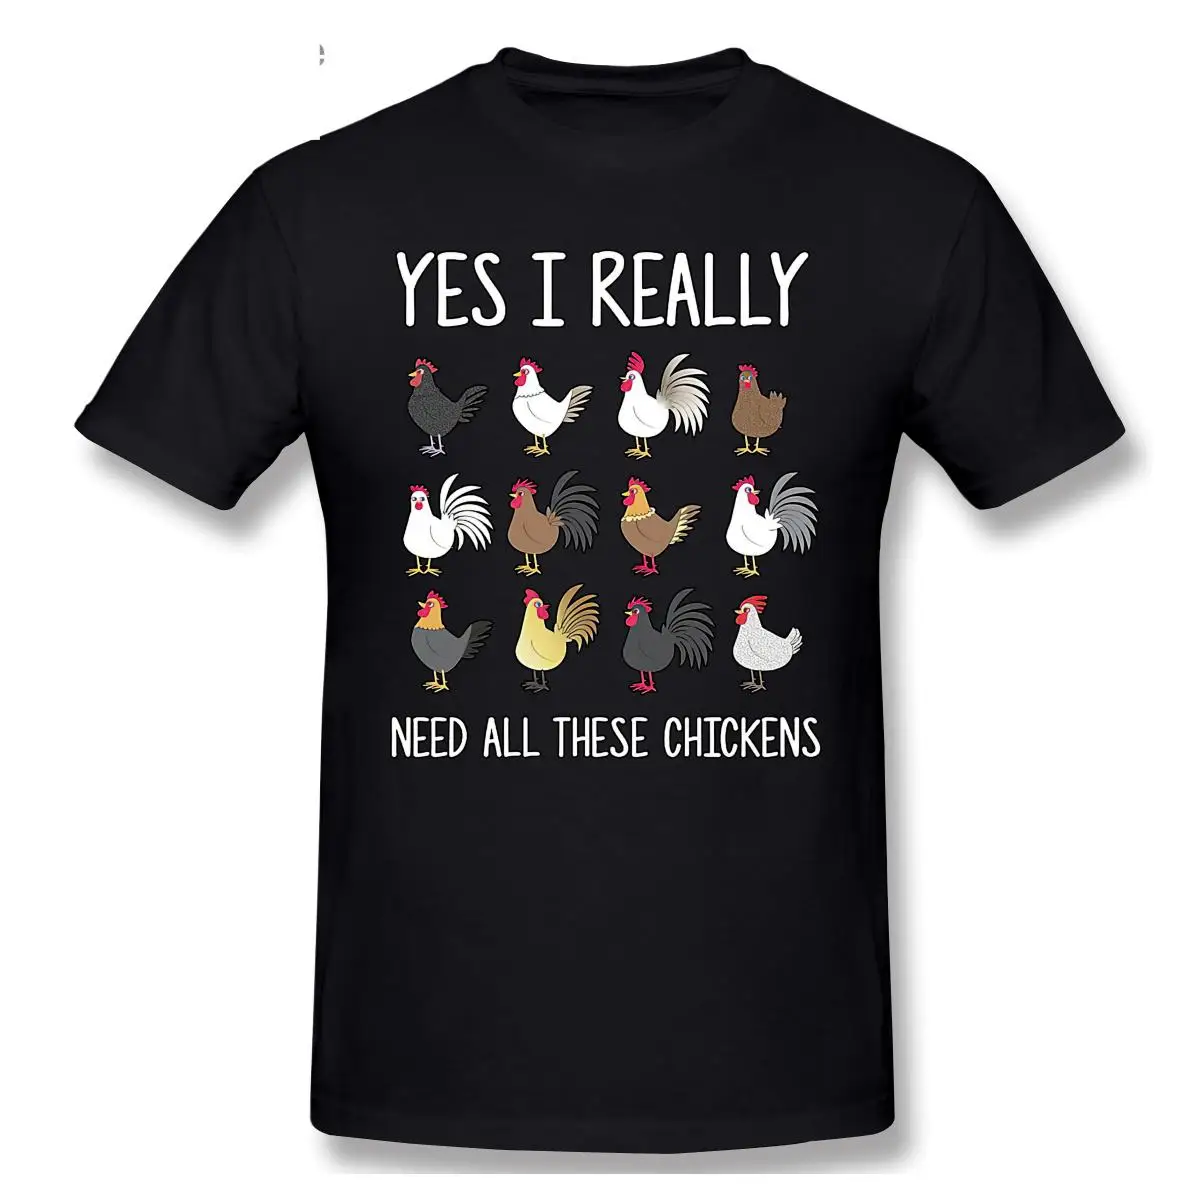 

Yes I Really Do Need All These Chickens Funny Farming T Shirts Farmer Crazy Chicken Lady Chicken TShirts Chicks Hen T-Shirts